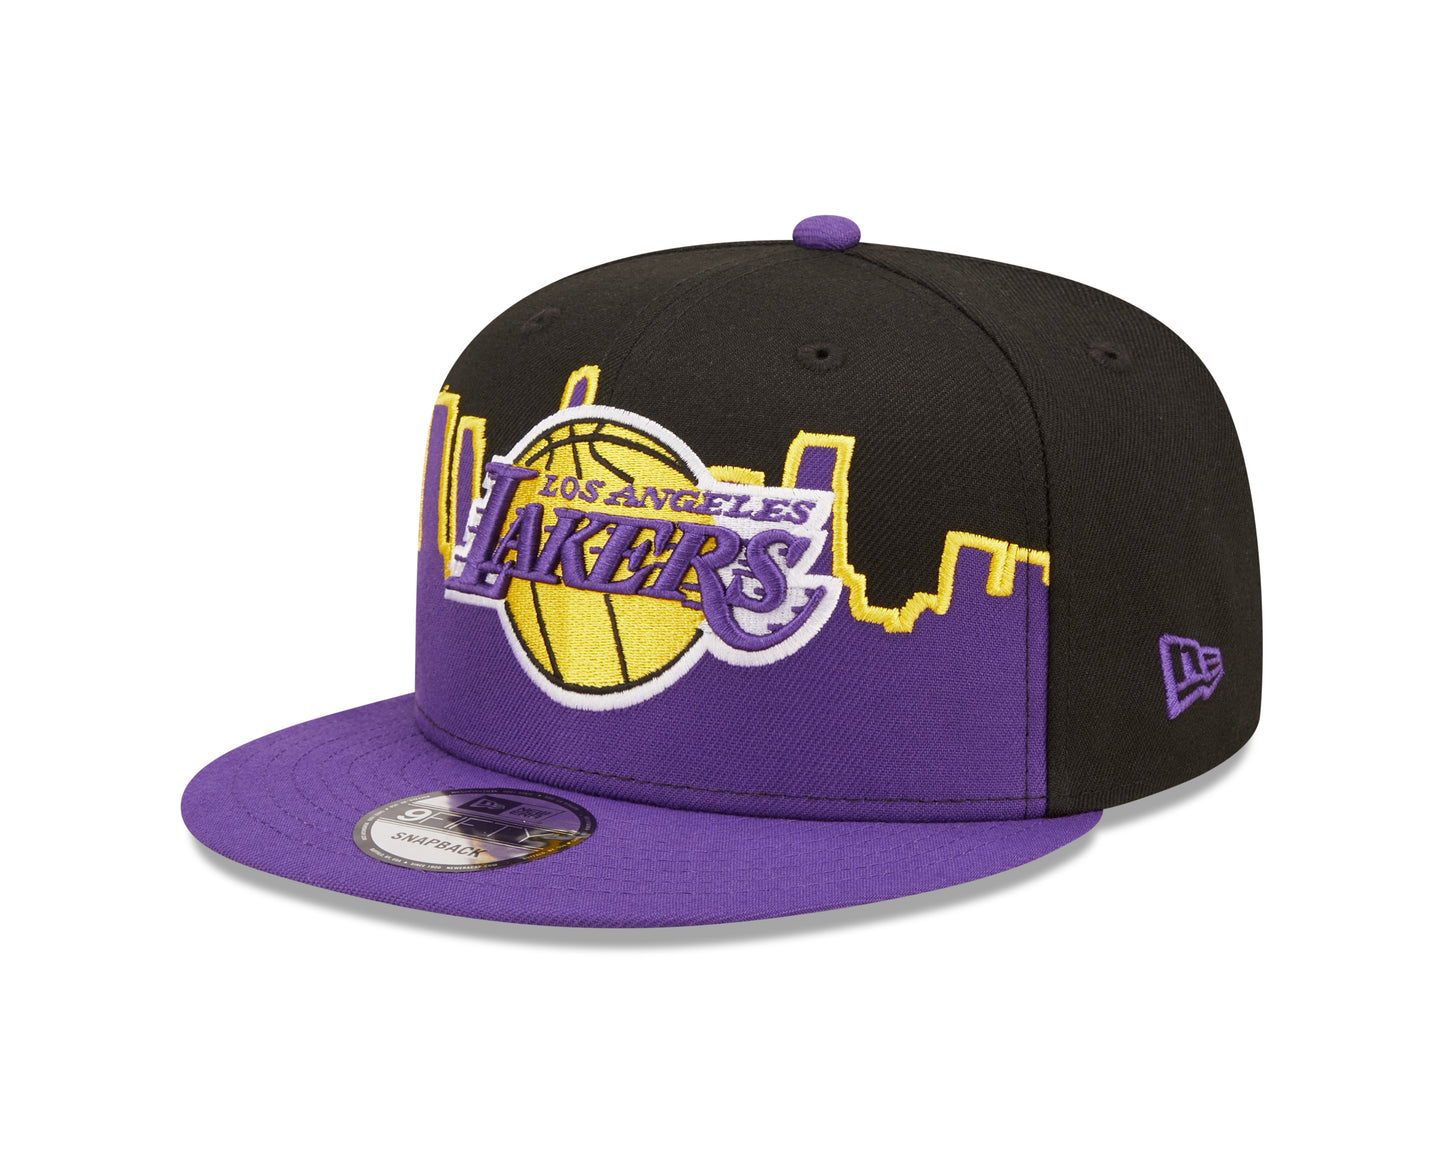 Los Angeles Lakers New Era Tip-Off 9FIFTY Snap Back Hat - Purple/Black